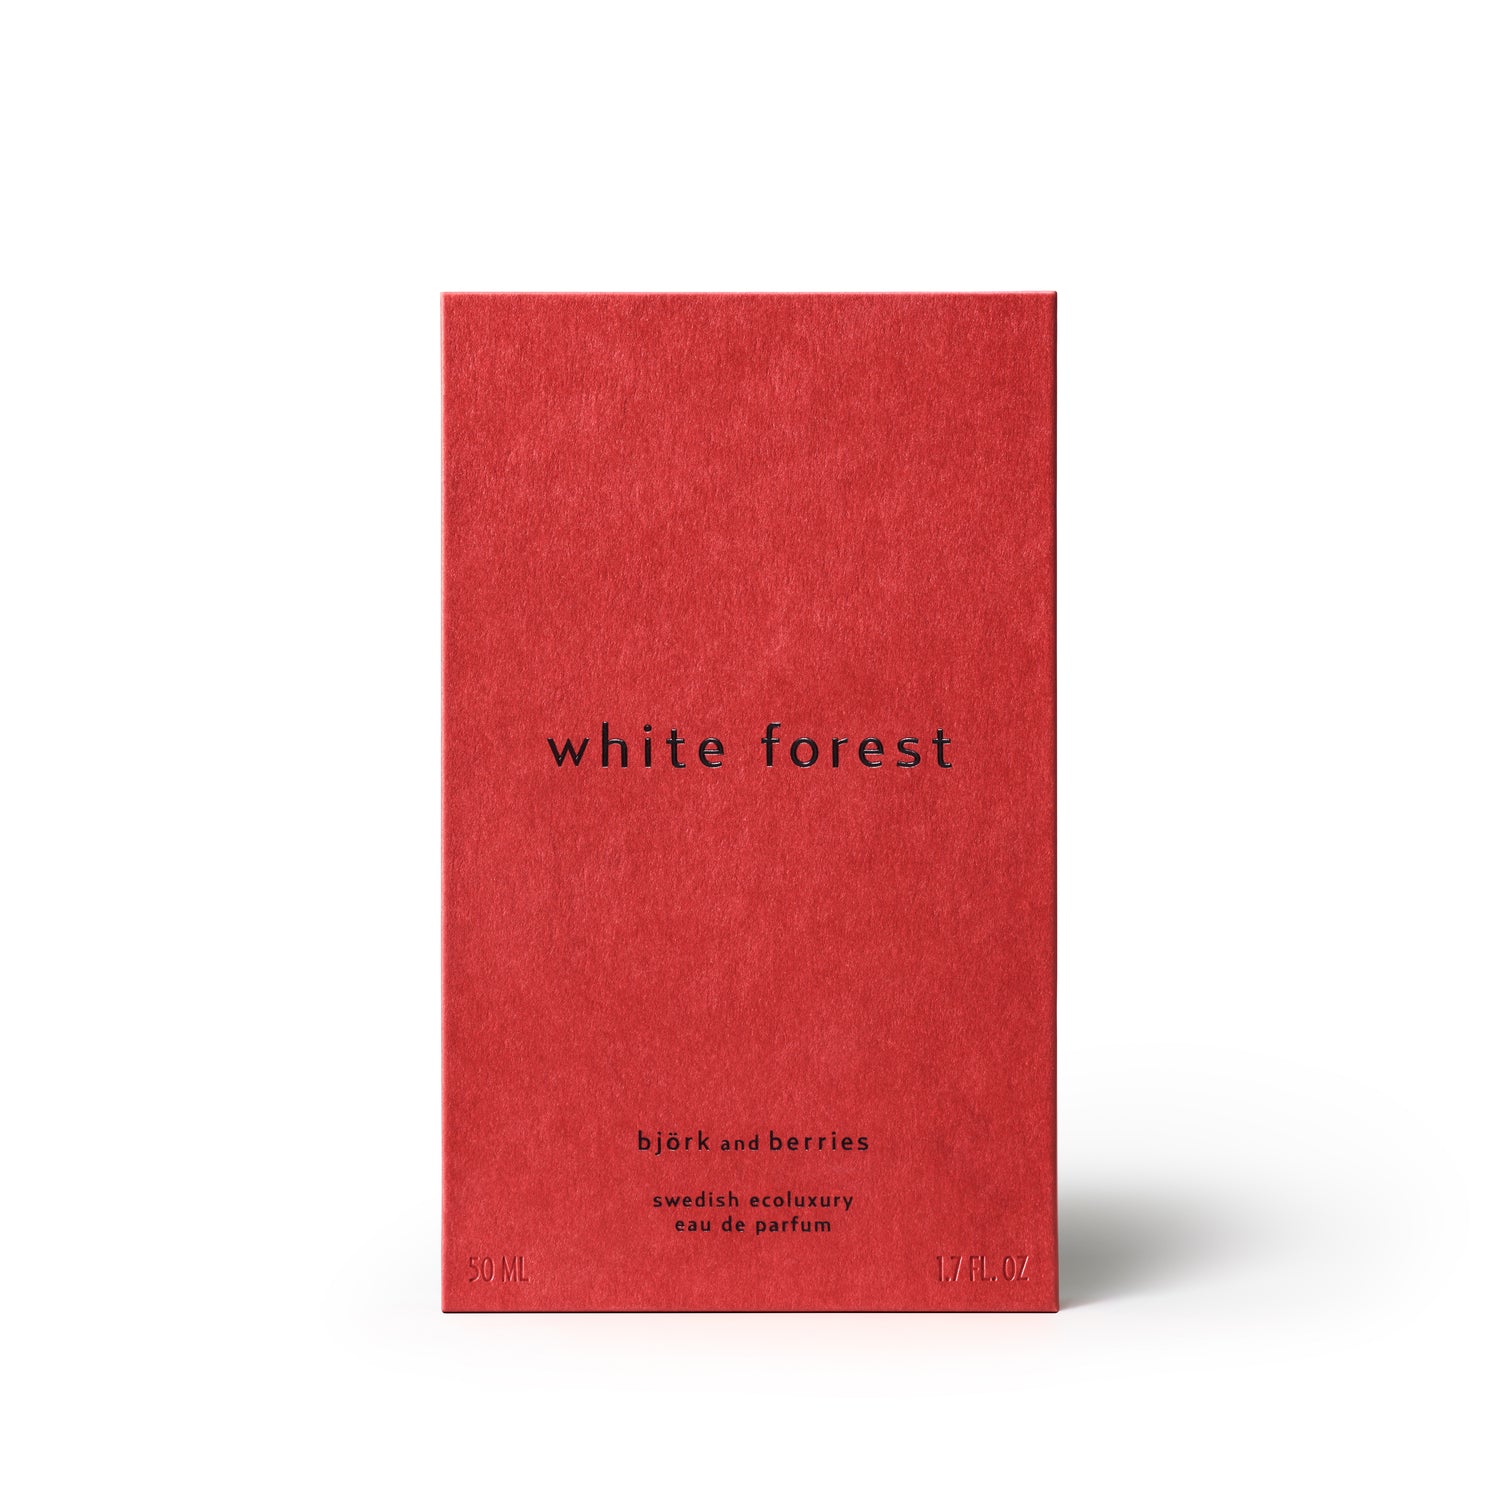 WHITE FOREST